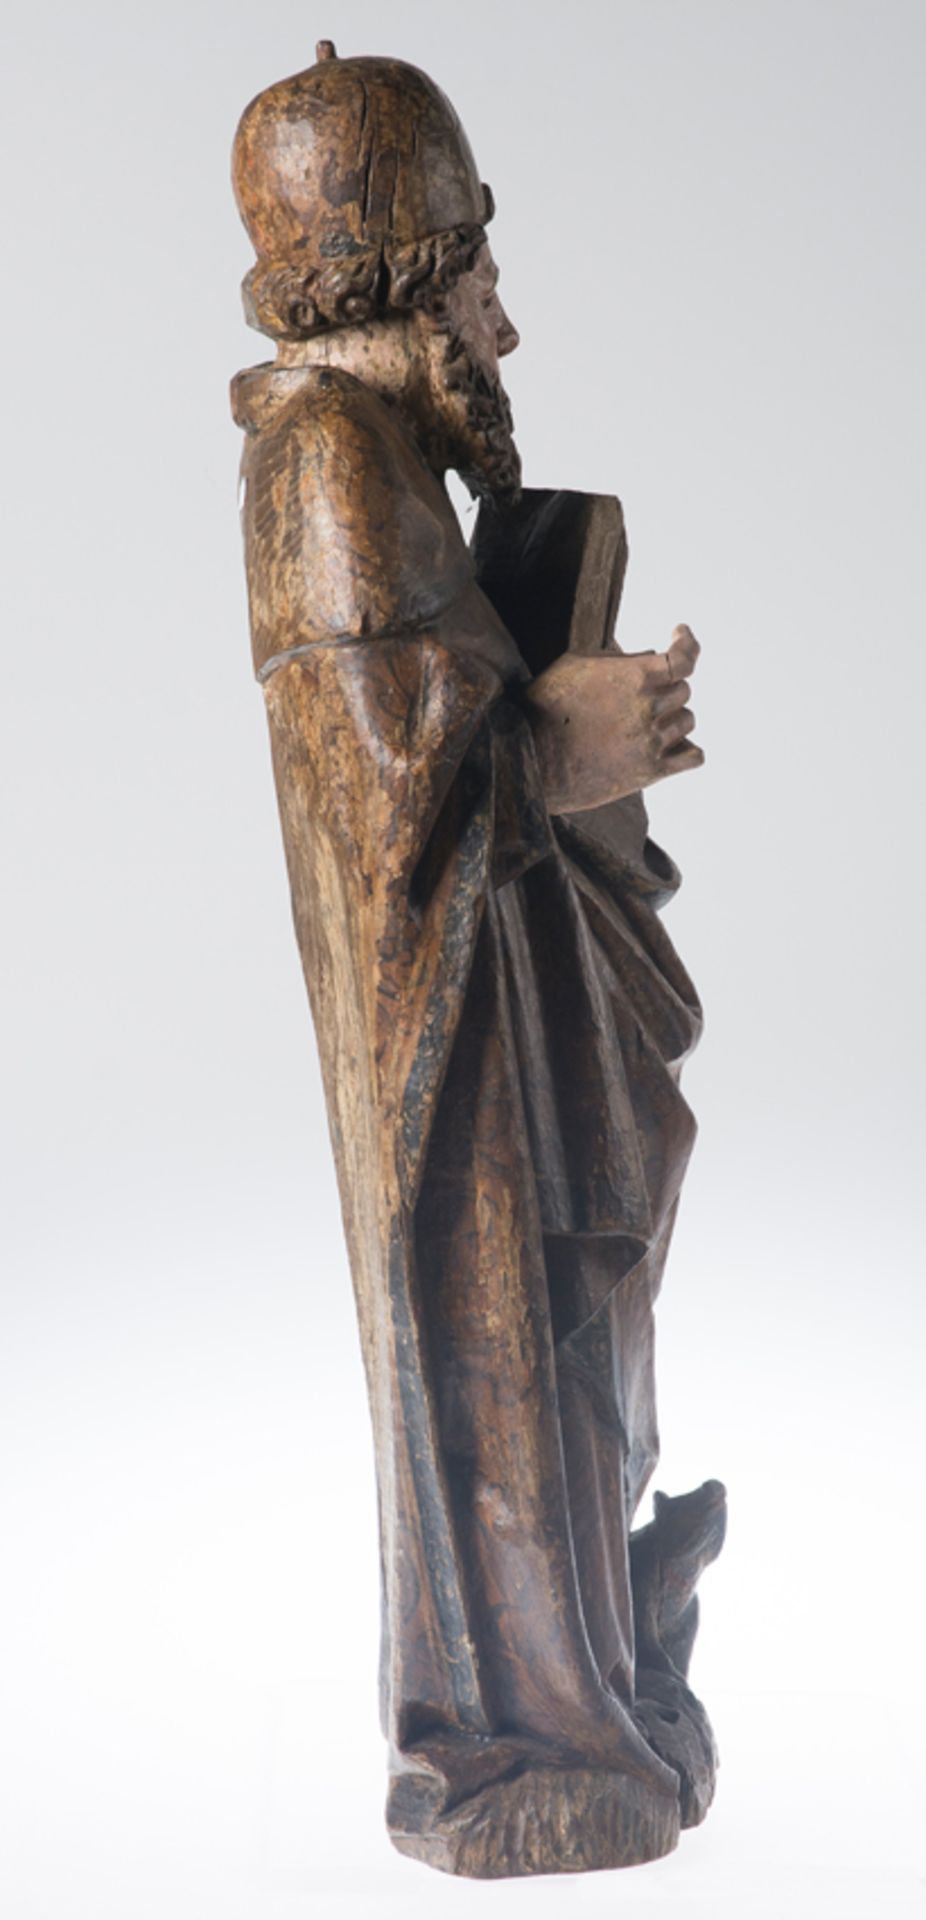 "Saint Anthony". Carved wooden sculpture. Castilian School. 15th century. - Image 9 of 10